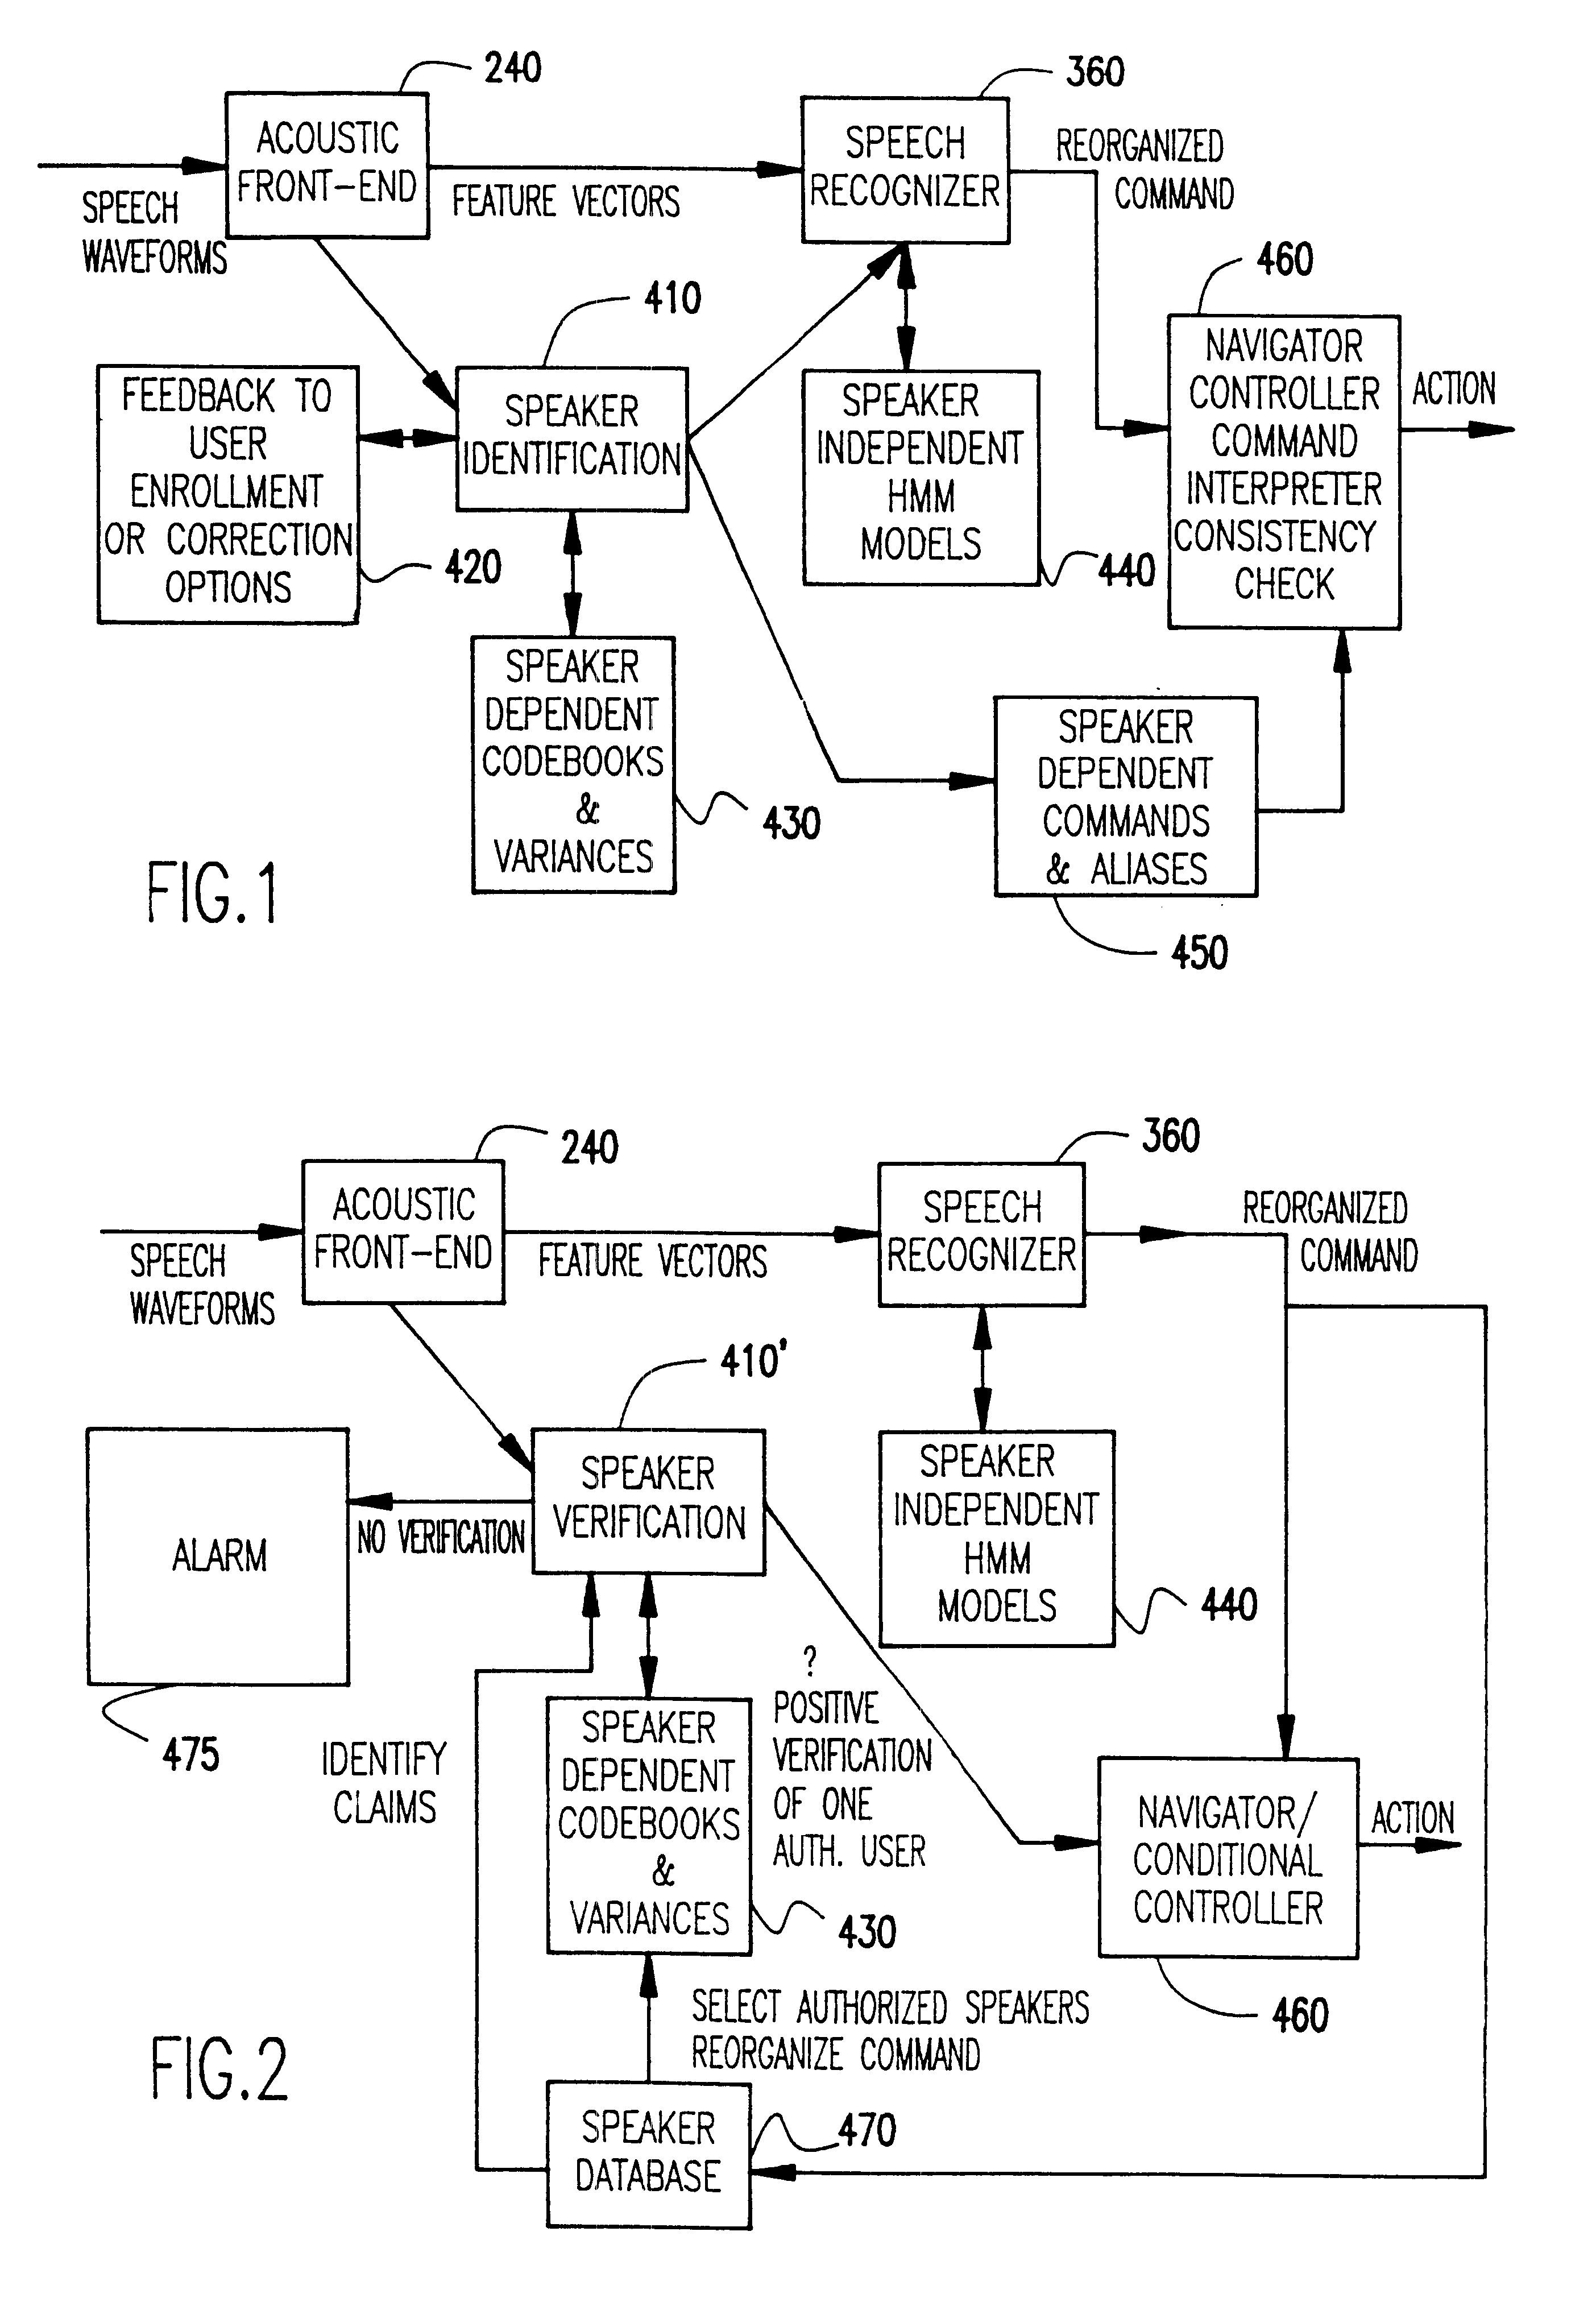 Text independent speaker recognition with simultaneous speech recognition for transparent command ambiguity resolution and continuous access control